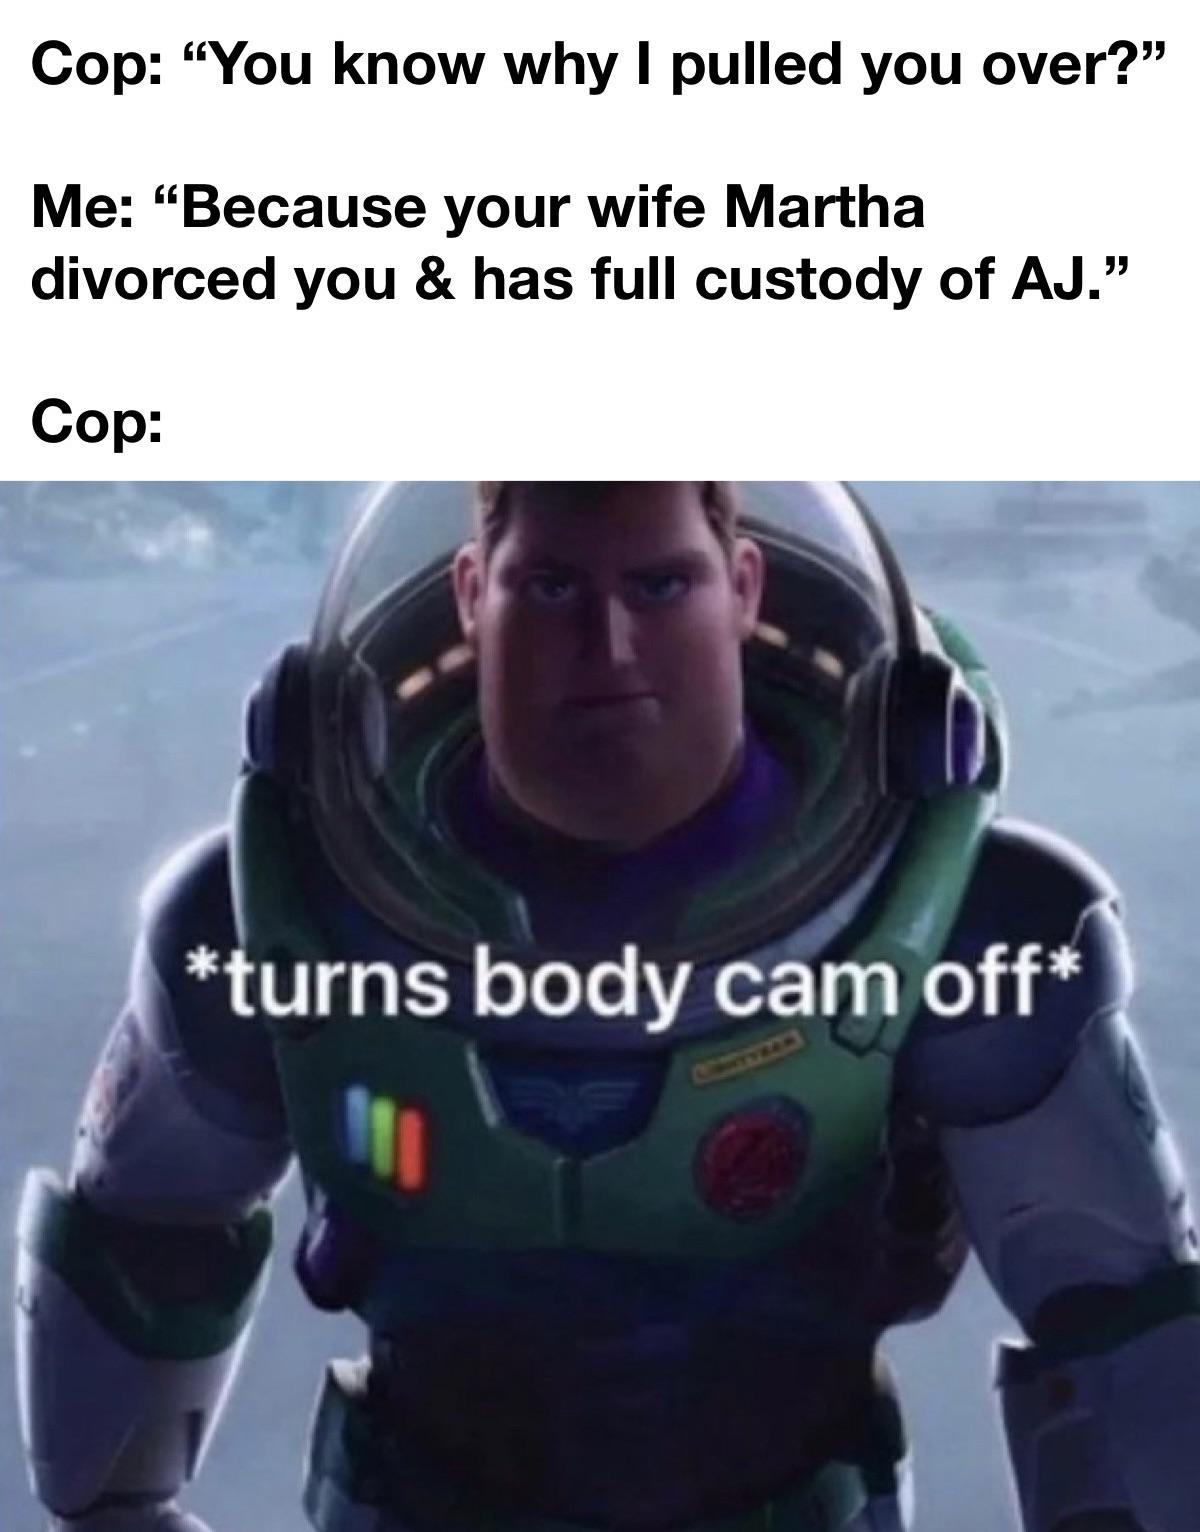 funny memes and pics - lightyear trailer - Cop "You know why I pulled you over? Me "Because your wife Martha divorced you & has full custody of Aj." Cop turns body cam off 111